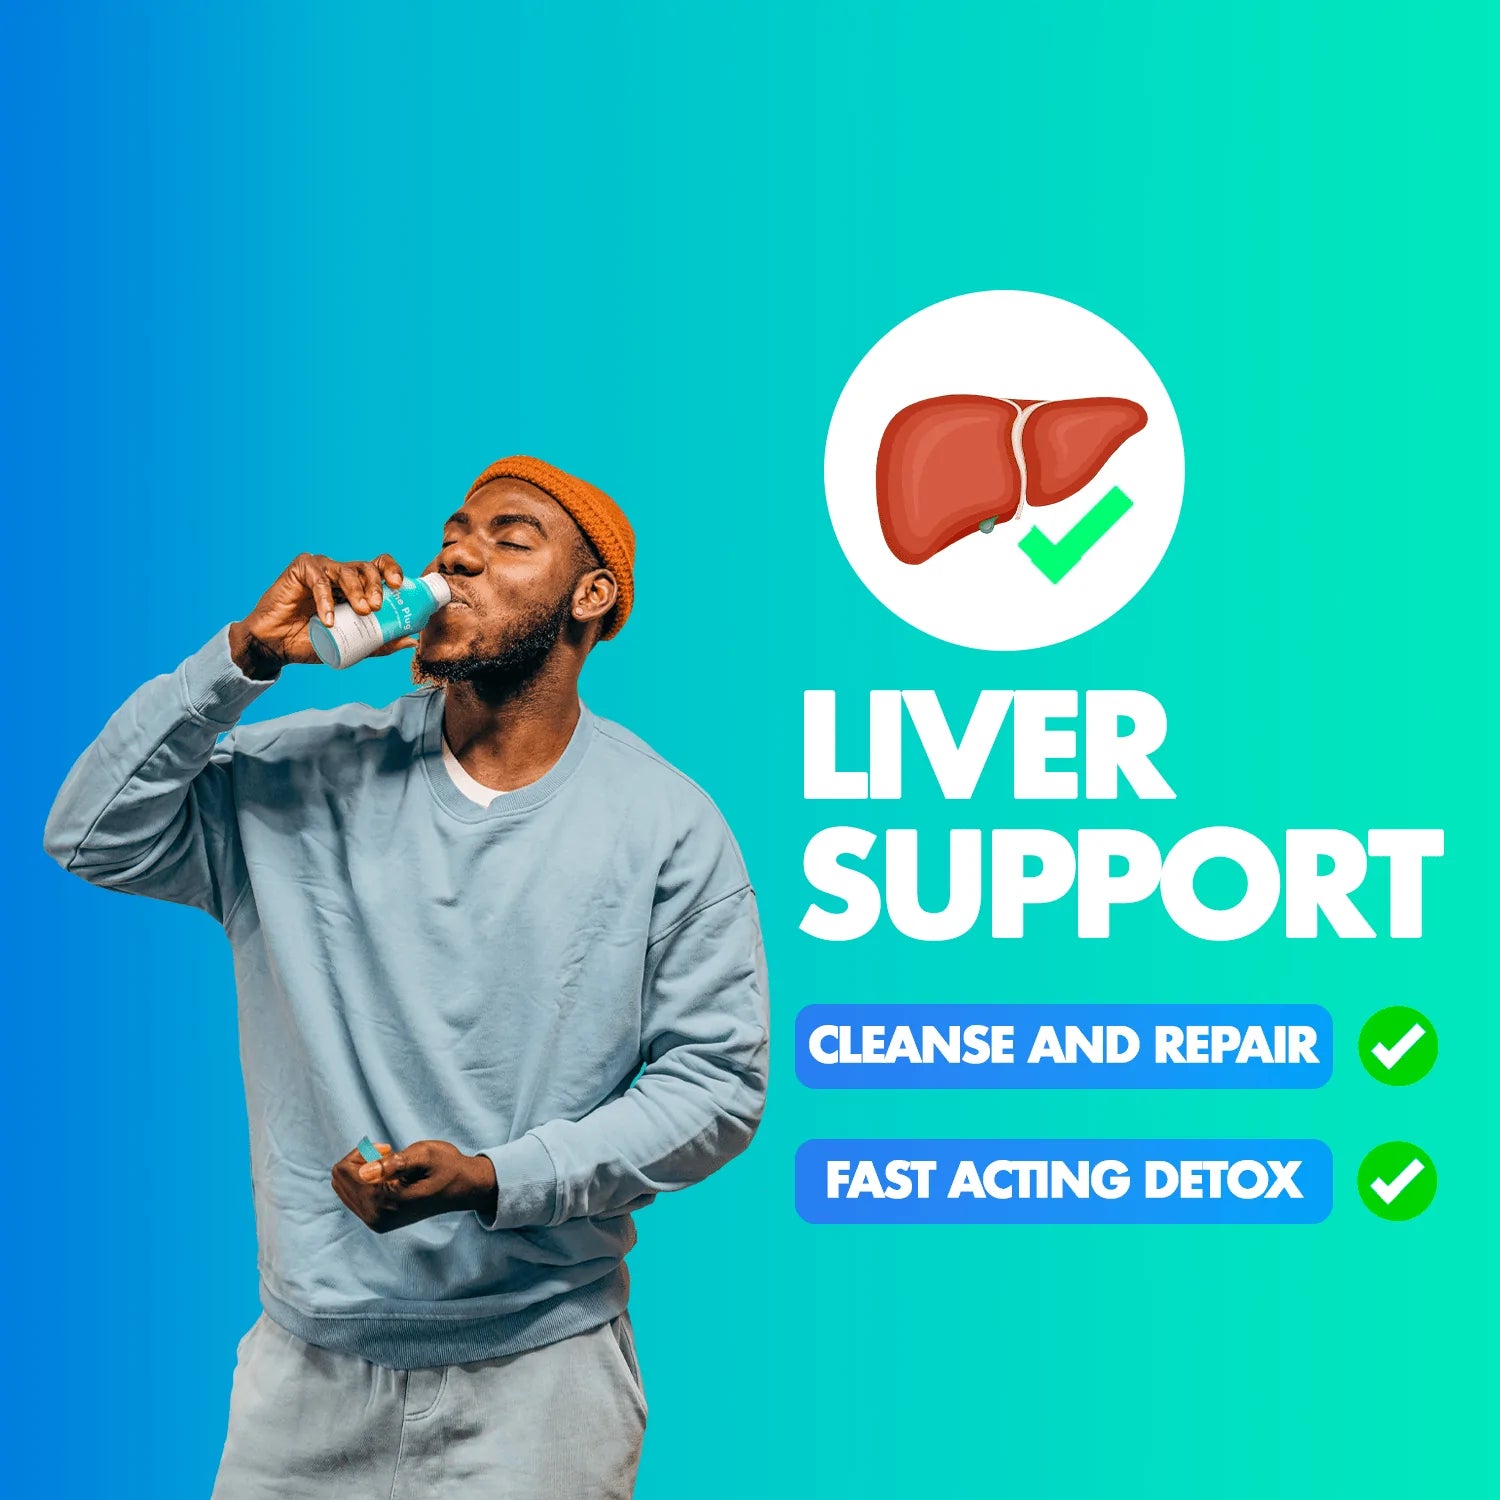  Liver Support Supplements | The Plug Drink by The Plug Drink The Plug Drink Perfumarie